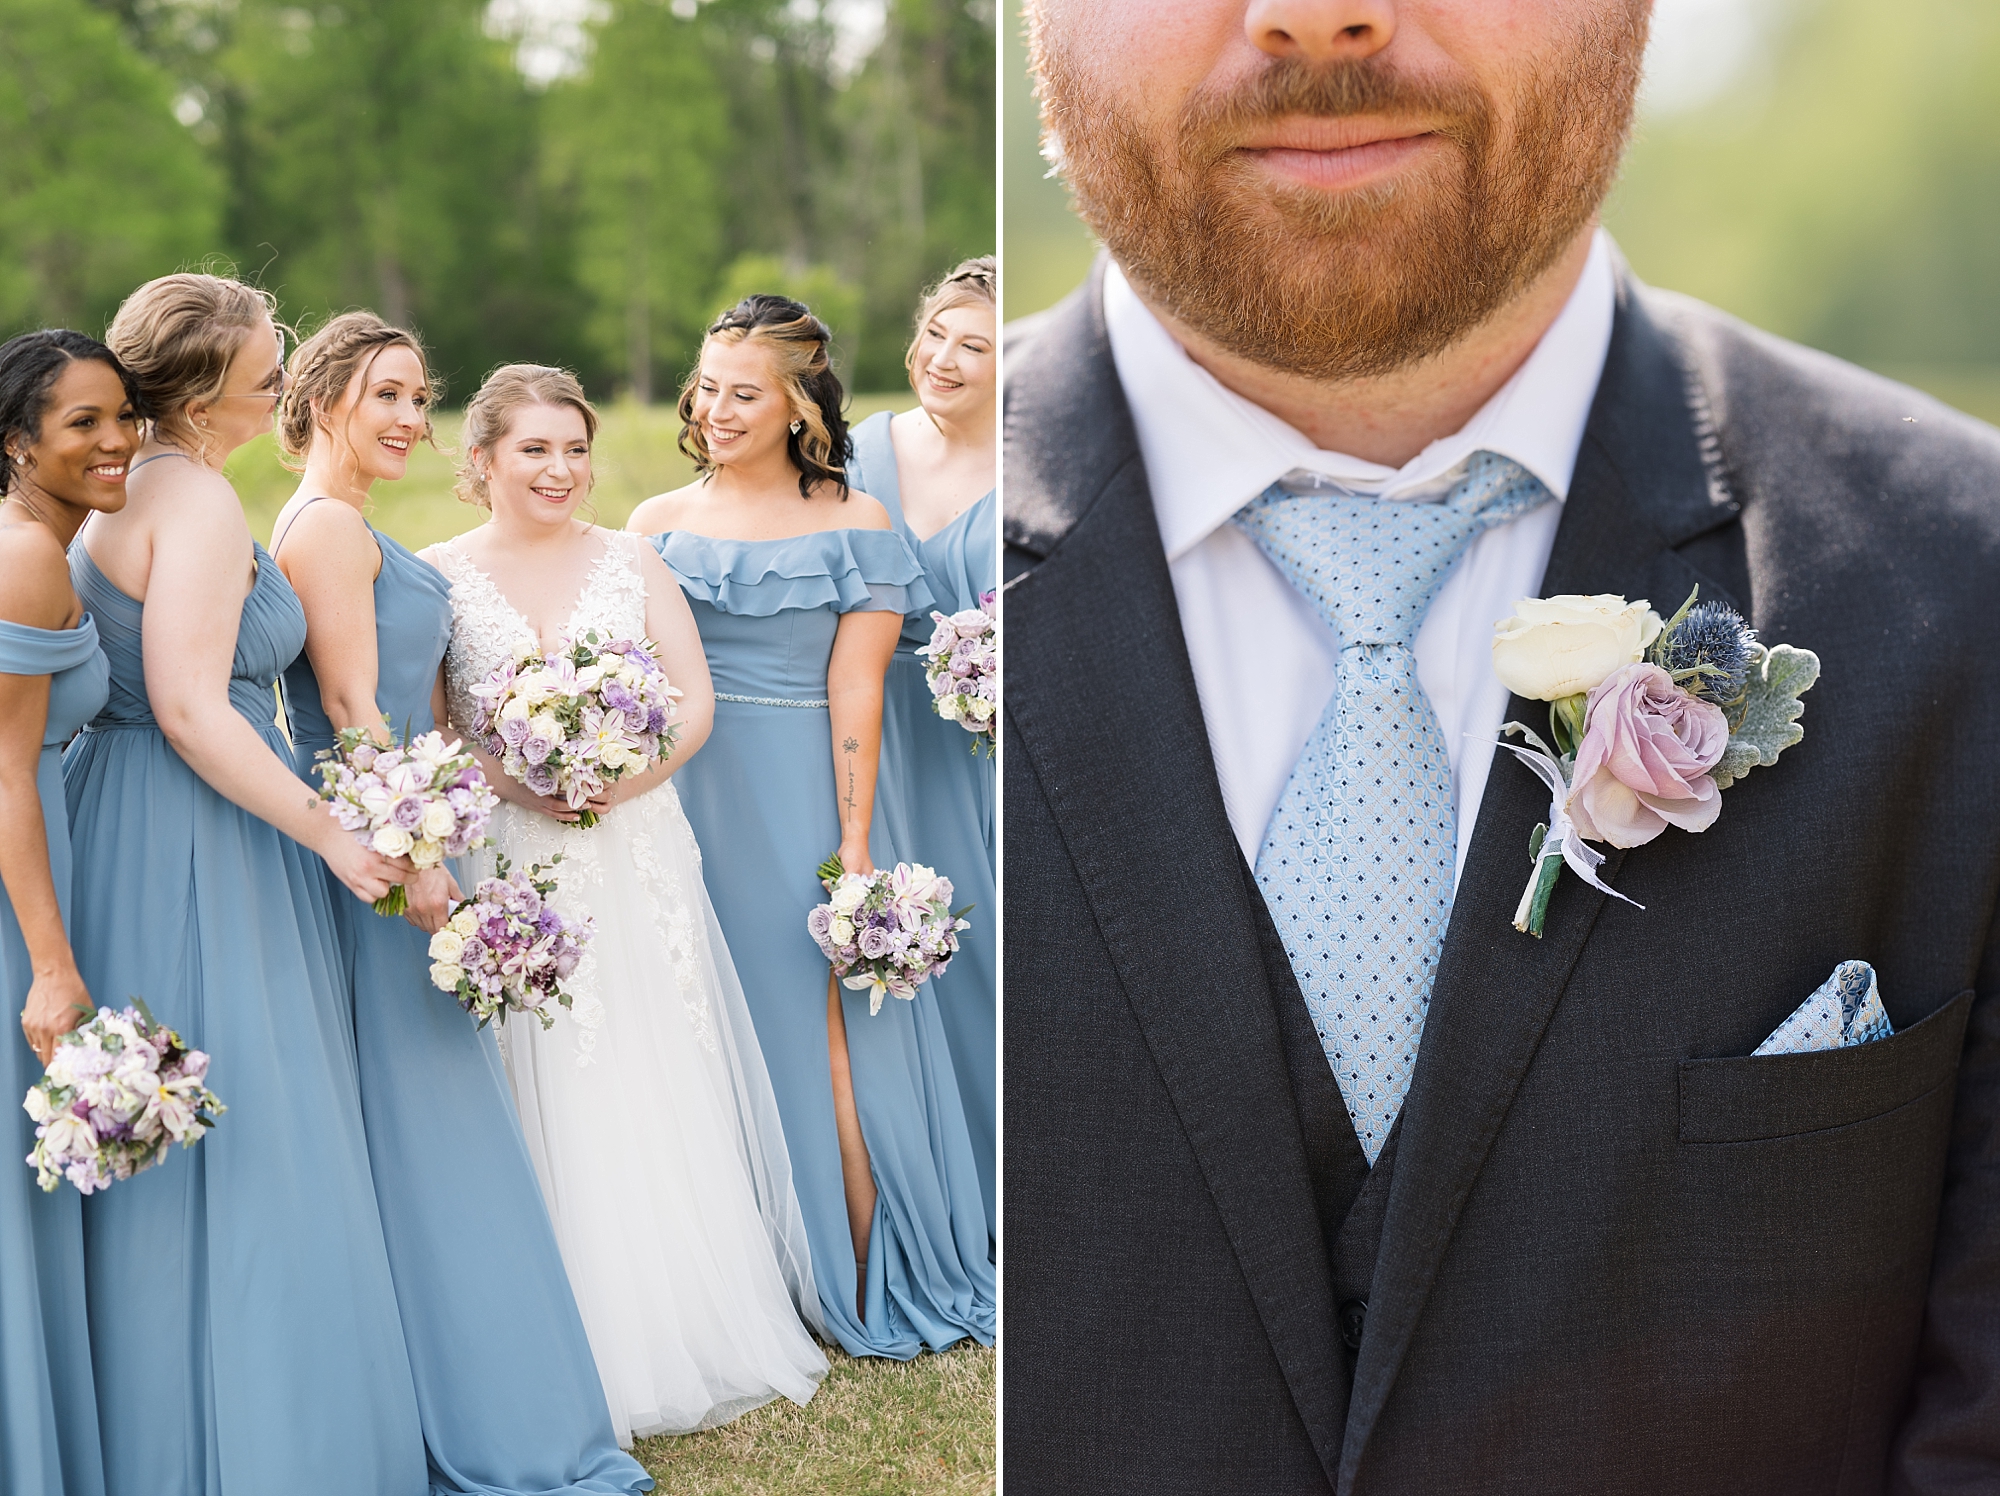 Details of grooms boutonniere - Raleigh NC Wedding Photographer - Sarah Hinckley Photography